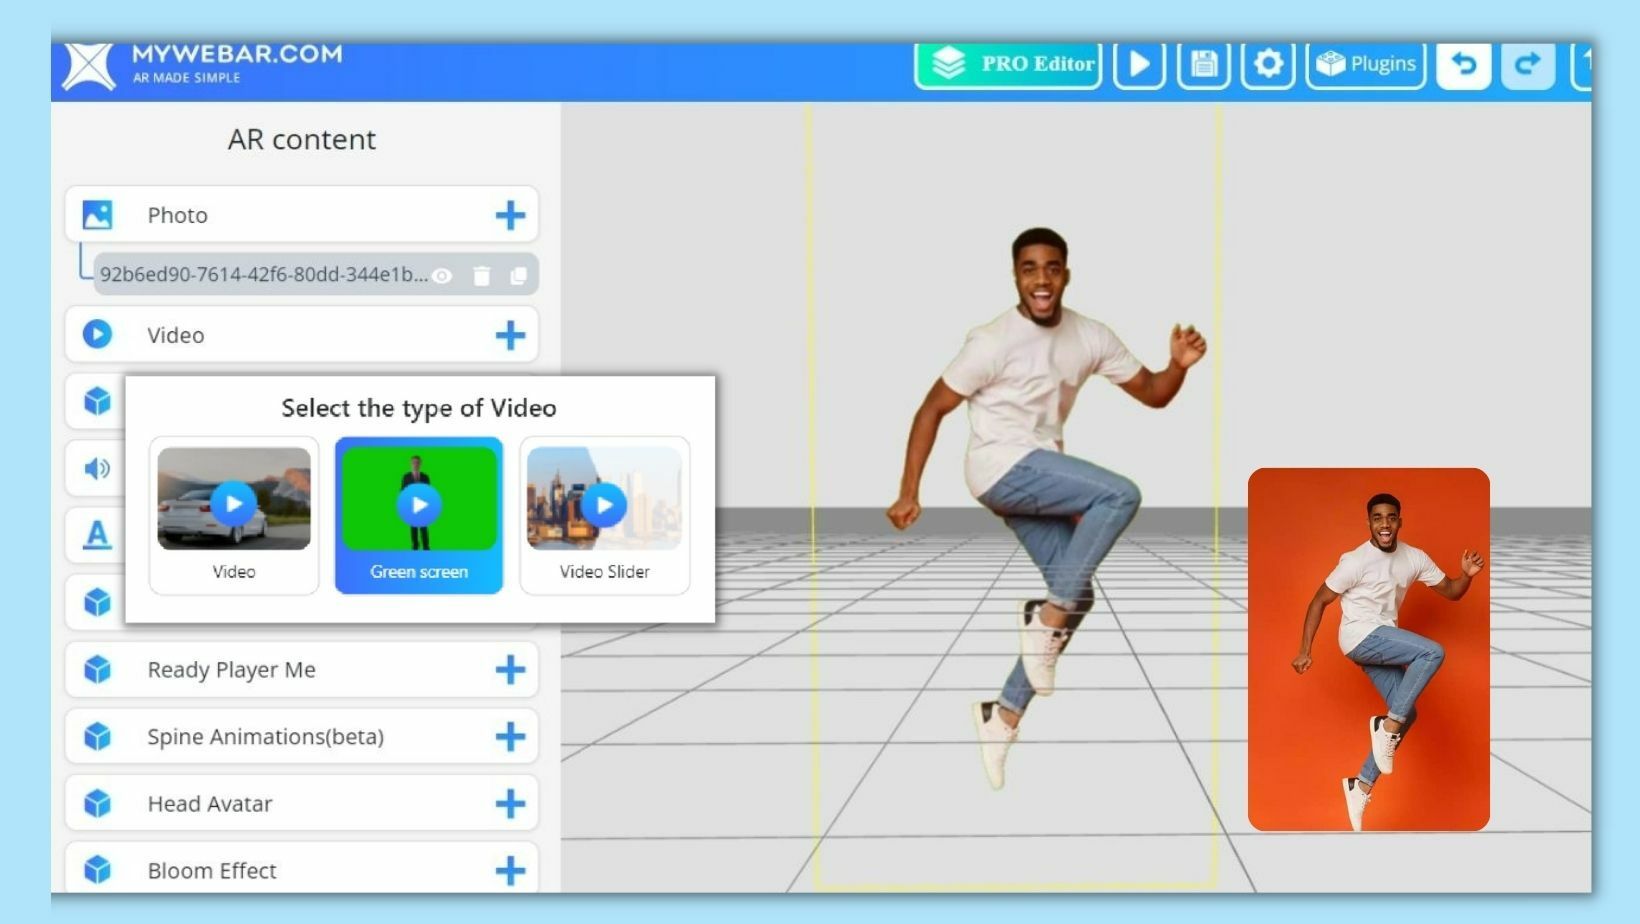 New in MyWebAR: Photo and Video Segmentation Features